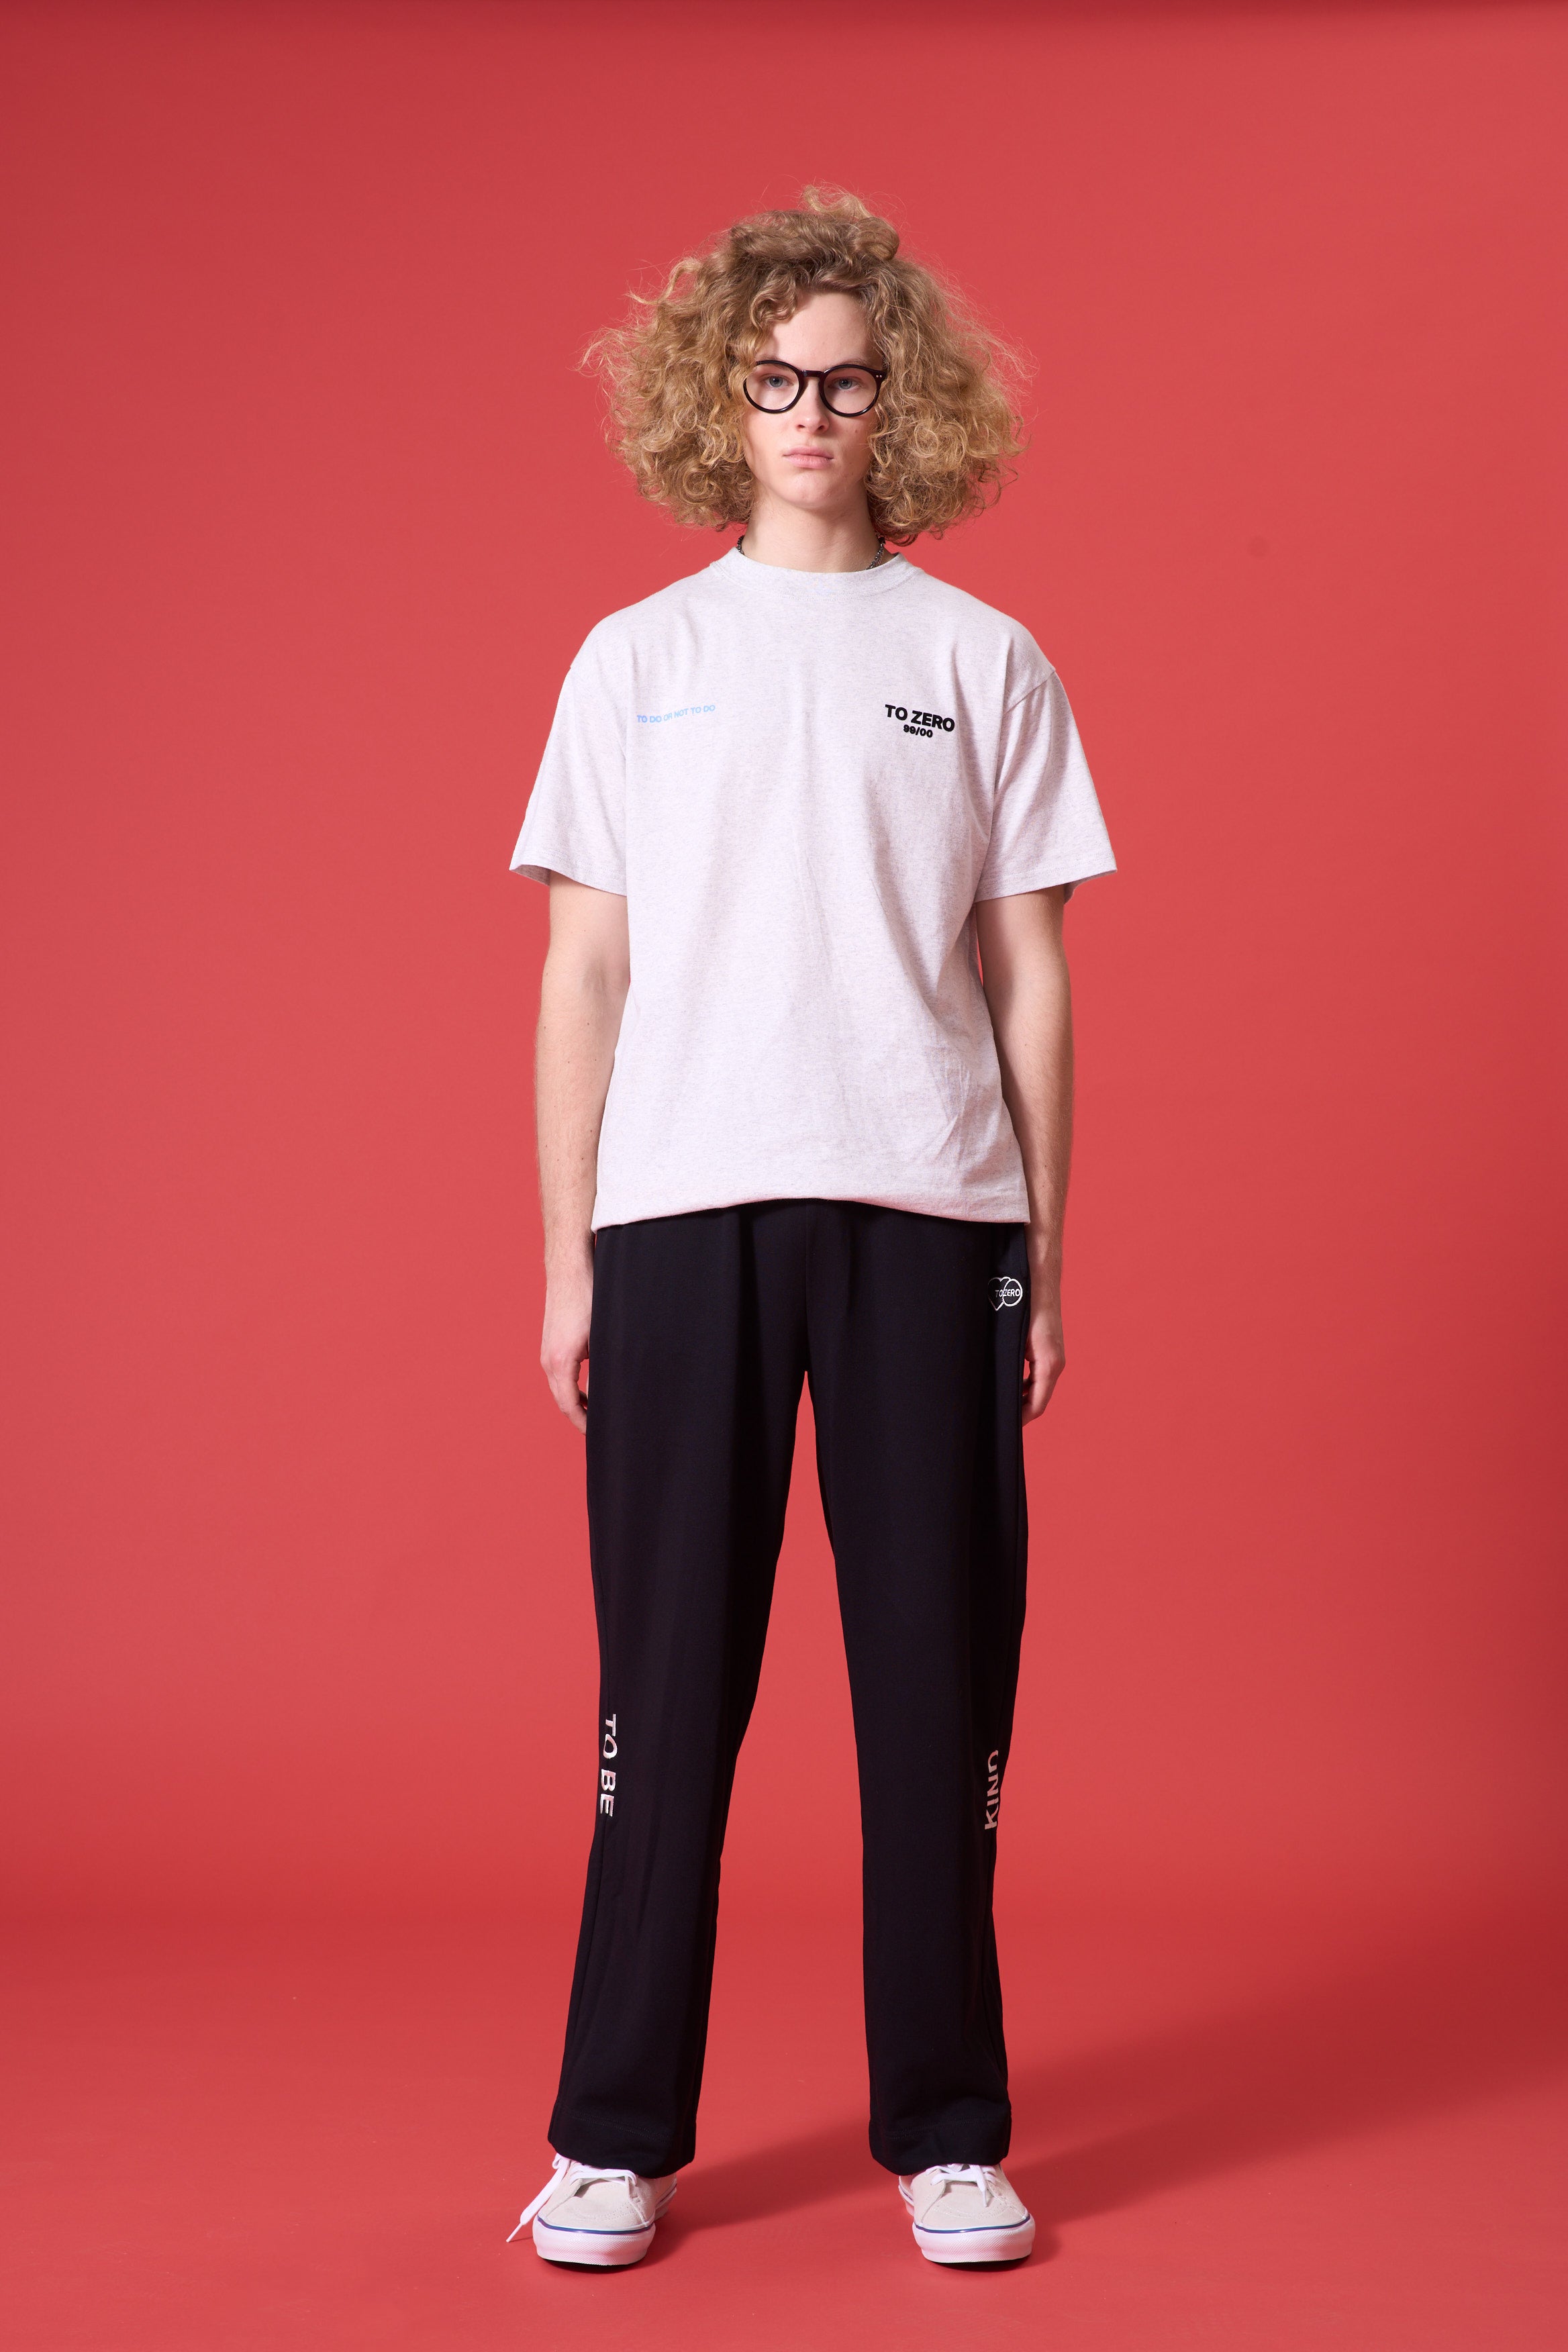 ‘TO BE KIND’ Embroidery Sweatpants